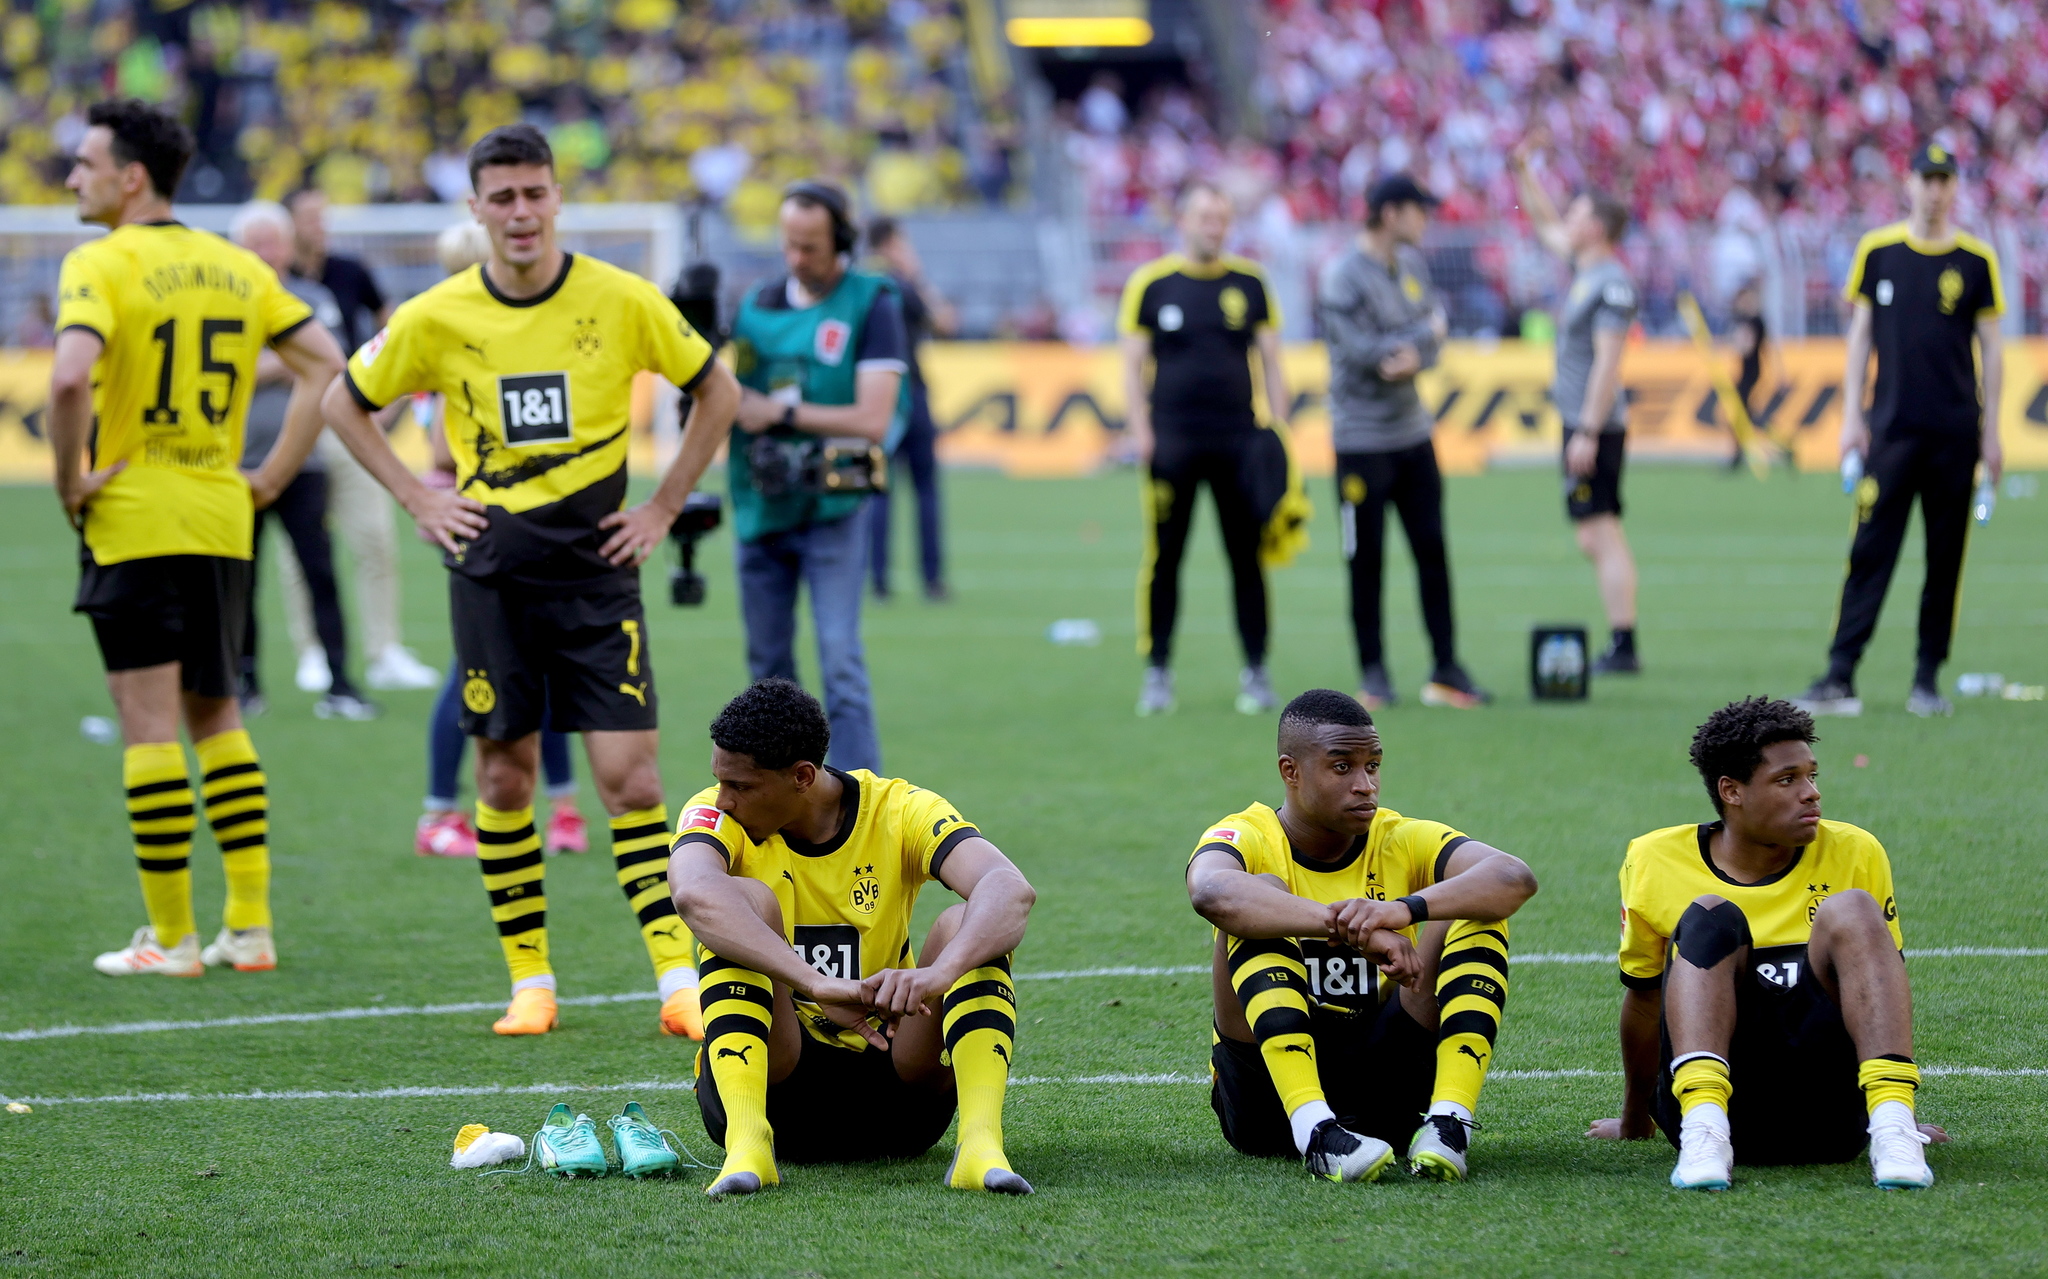 Dejected Dortmund players at the final whistle.